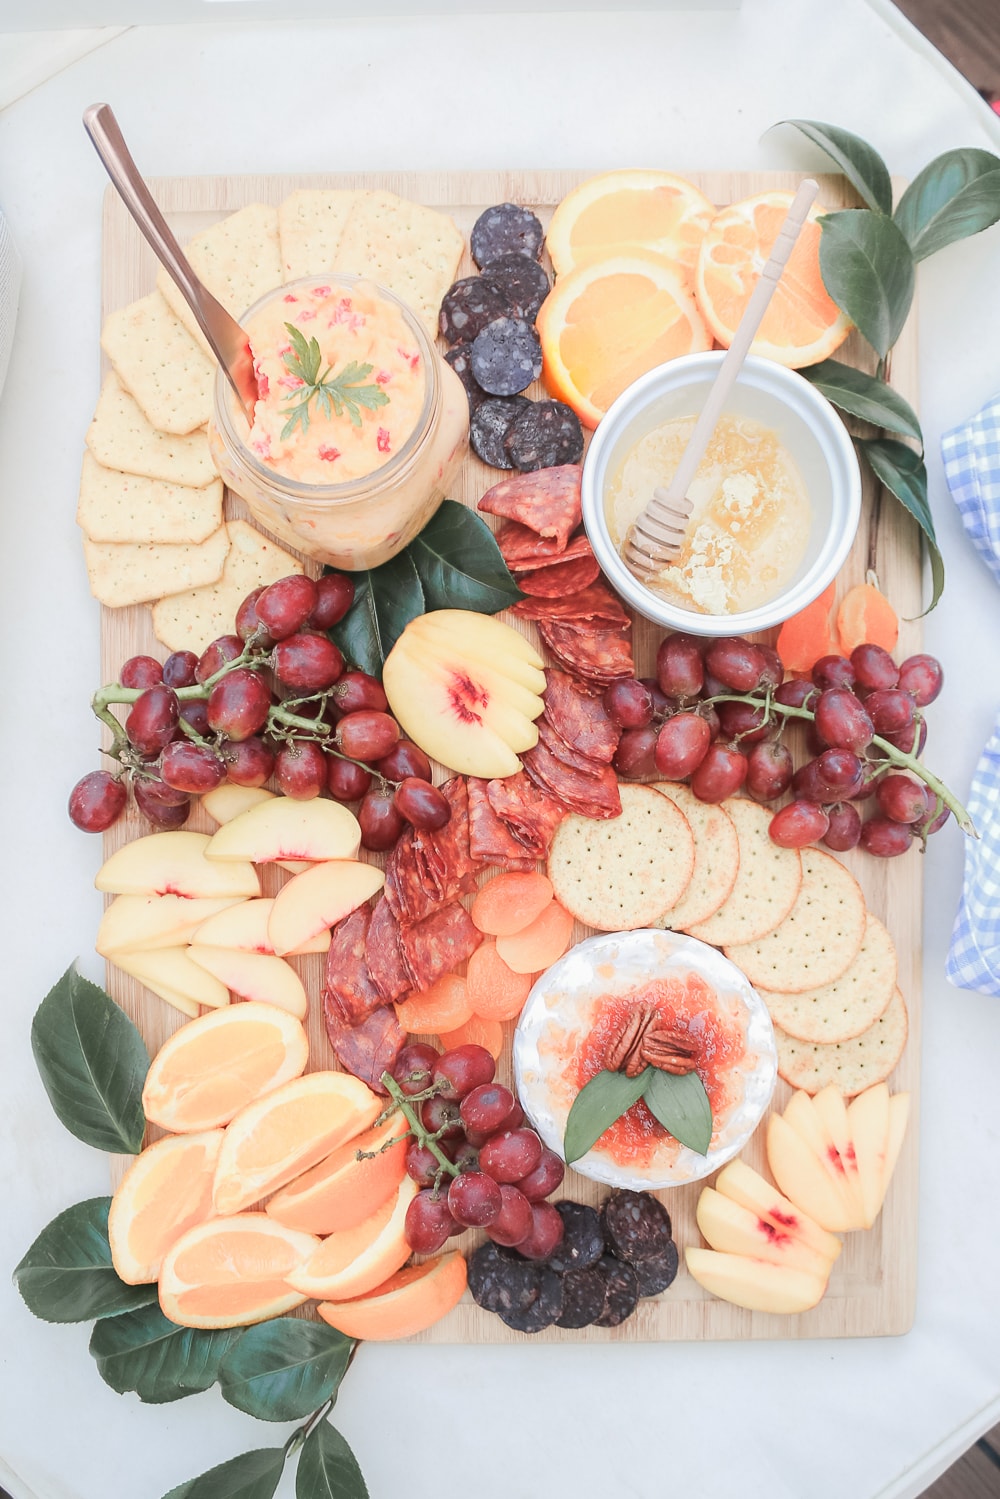 Blogger Stephanie Ziajka shares tips for the perfect charcuterie board (including listing out all the things to put on a charcuterie board) on Diary of a Debutante